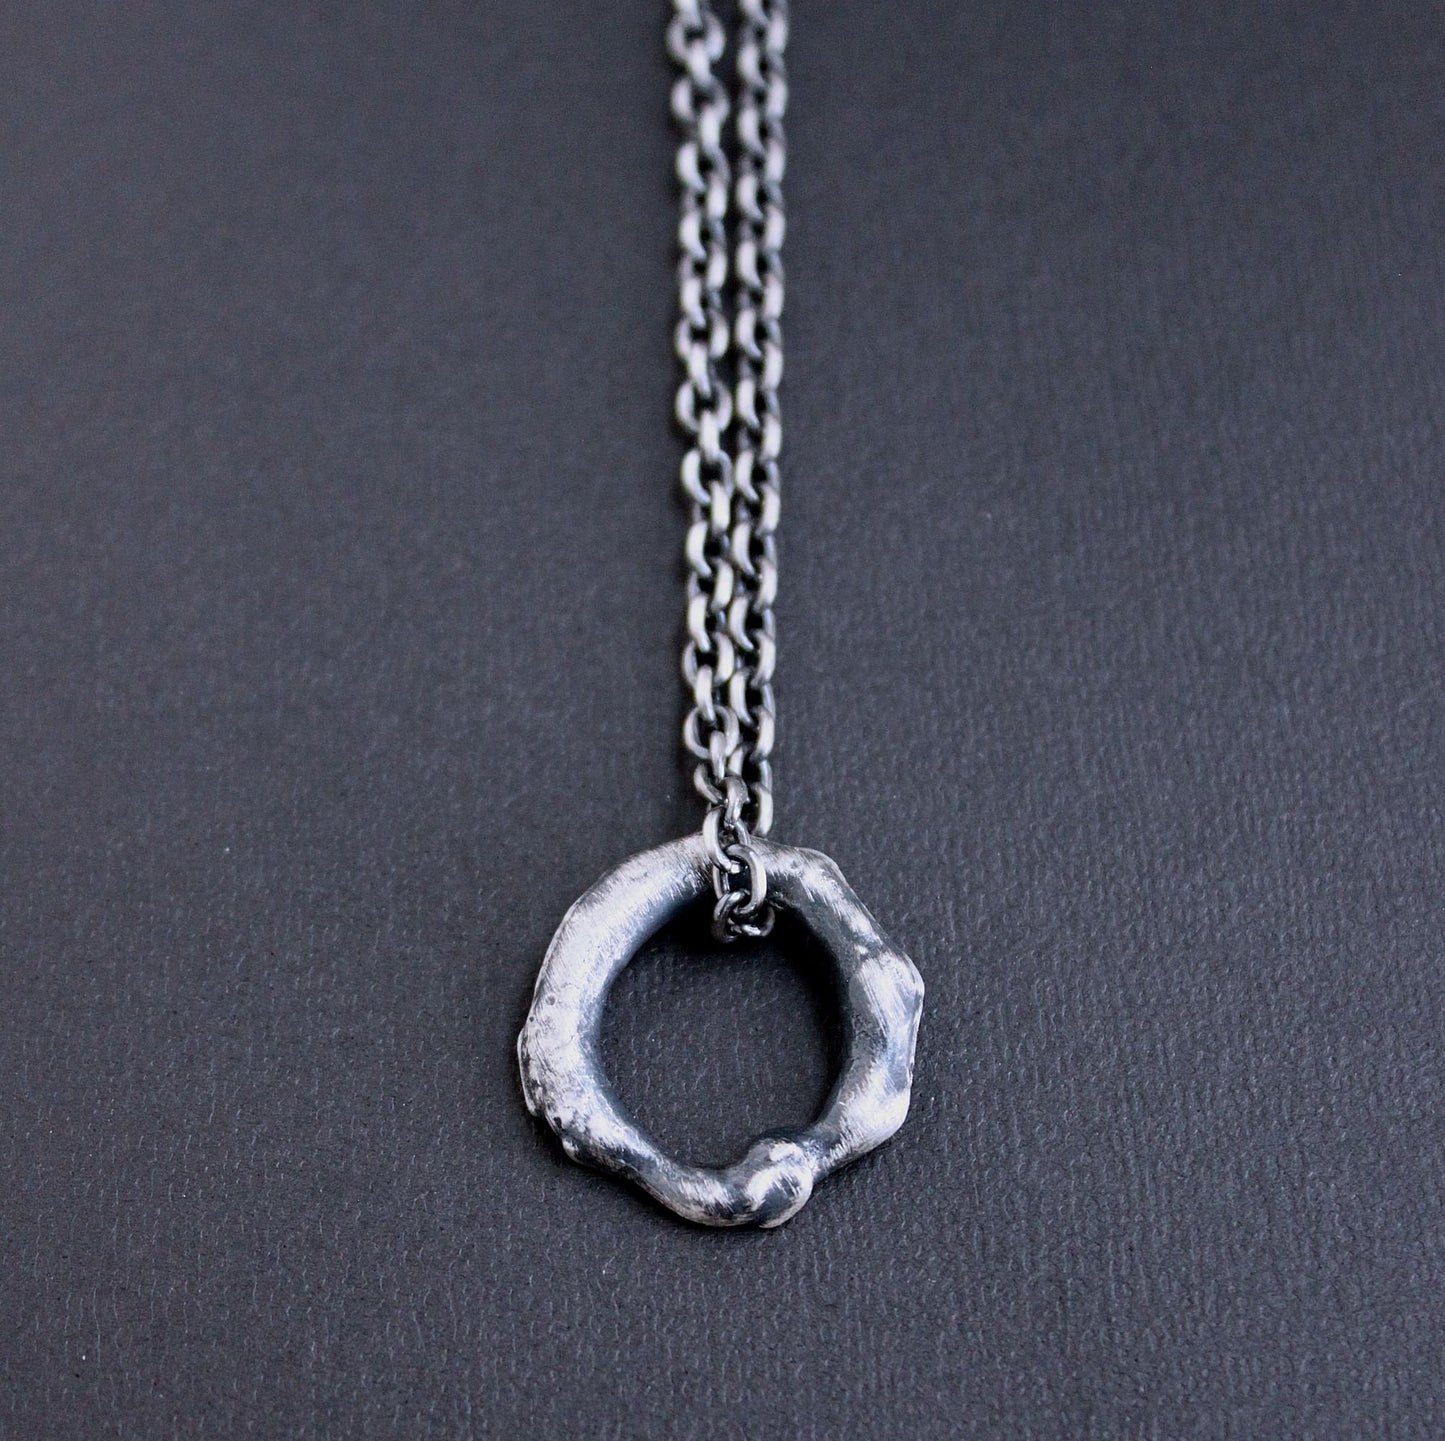 Abstract Silver Pendant Necklace